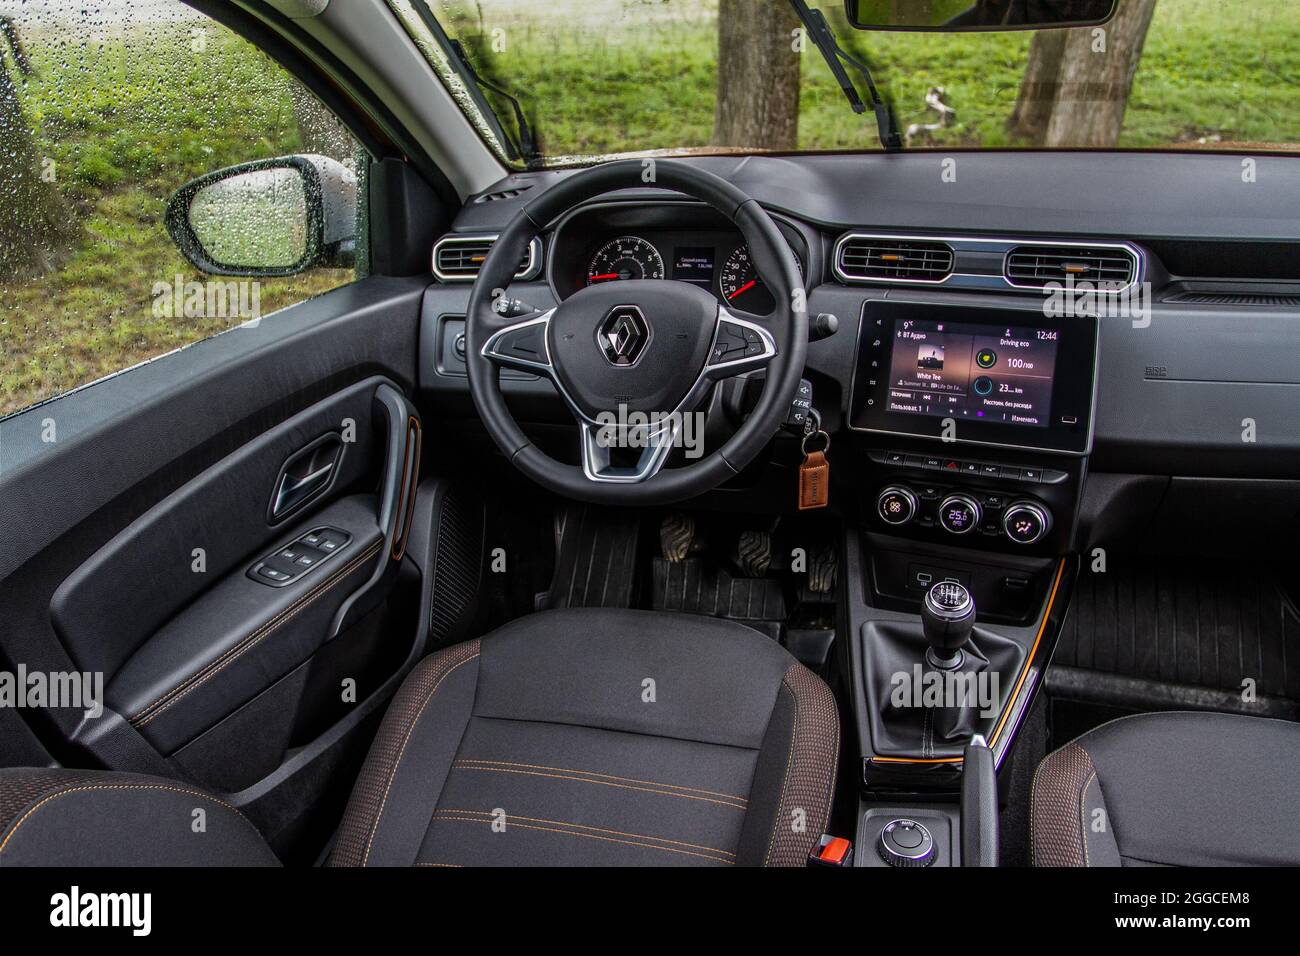 MOSCOW, RUSSIA - MAY 08, 2021 Renault Duster second generation interior view. Compact SUV car also called Dacia Duster. The general interior view with Stock Photo